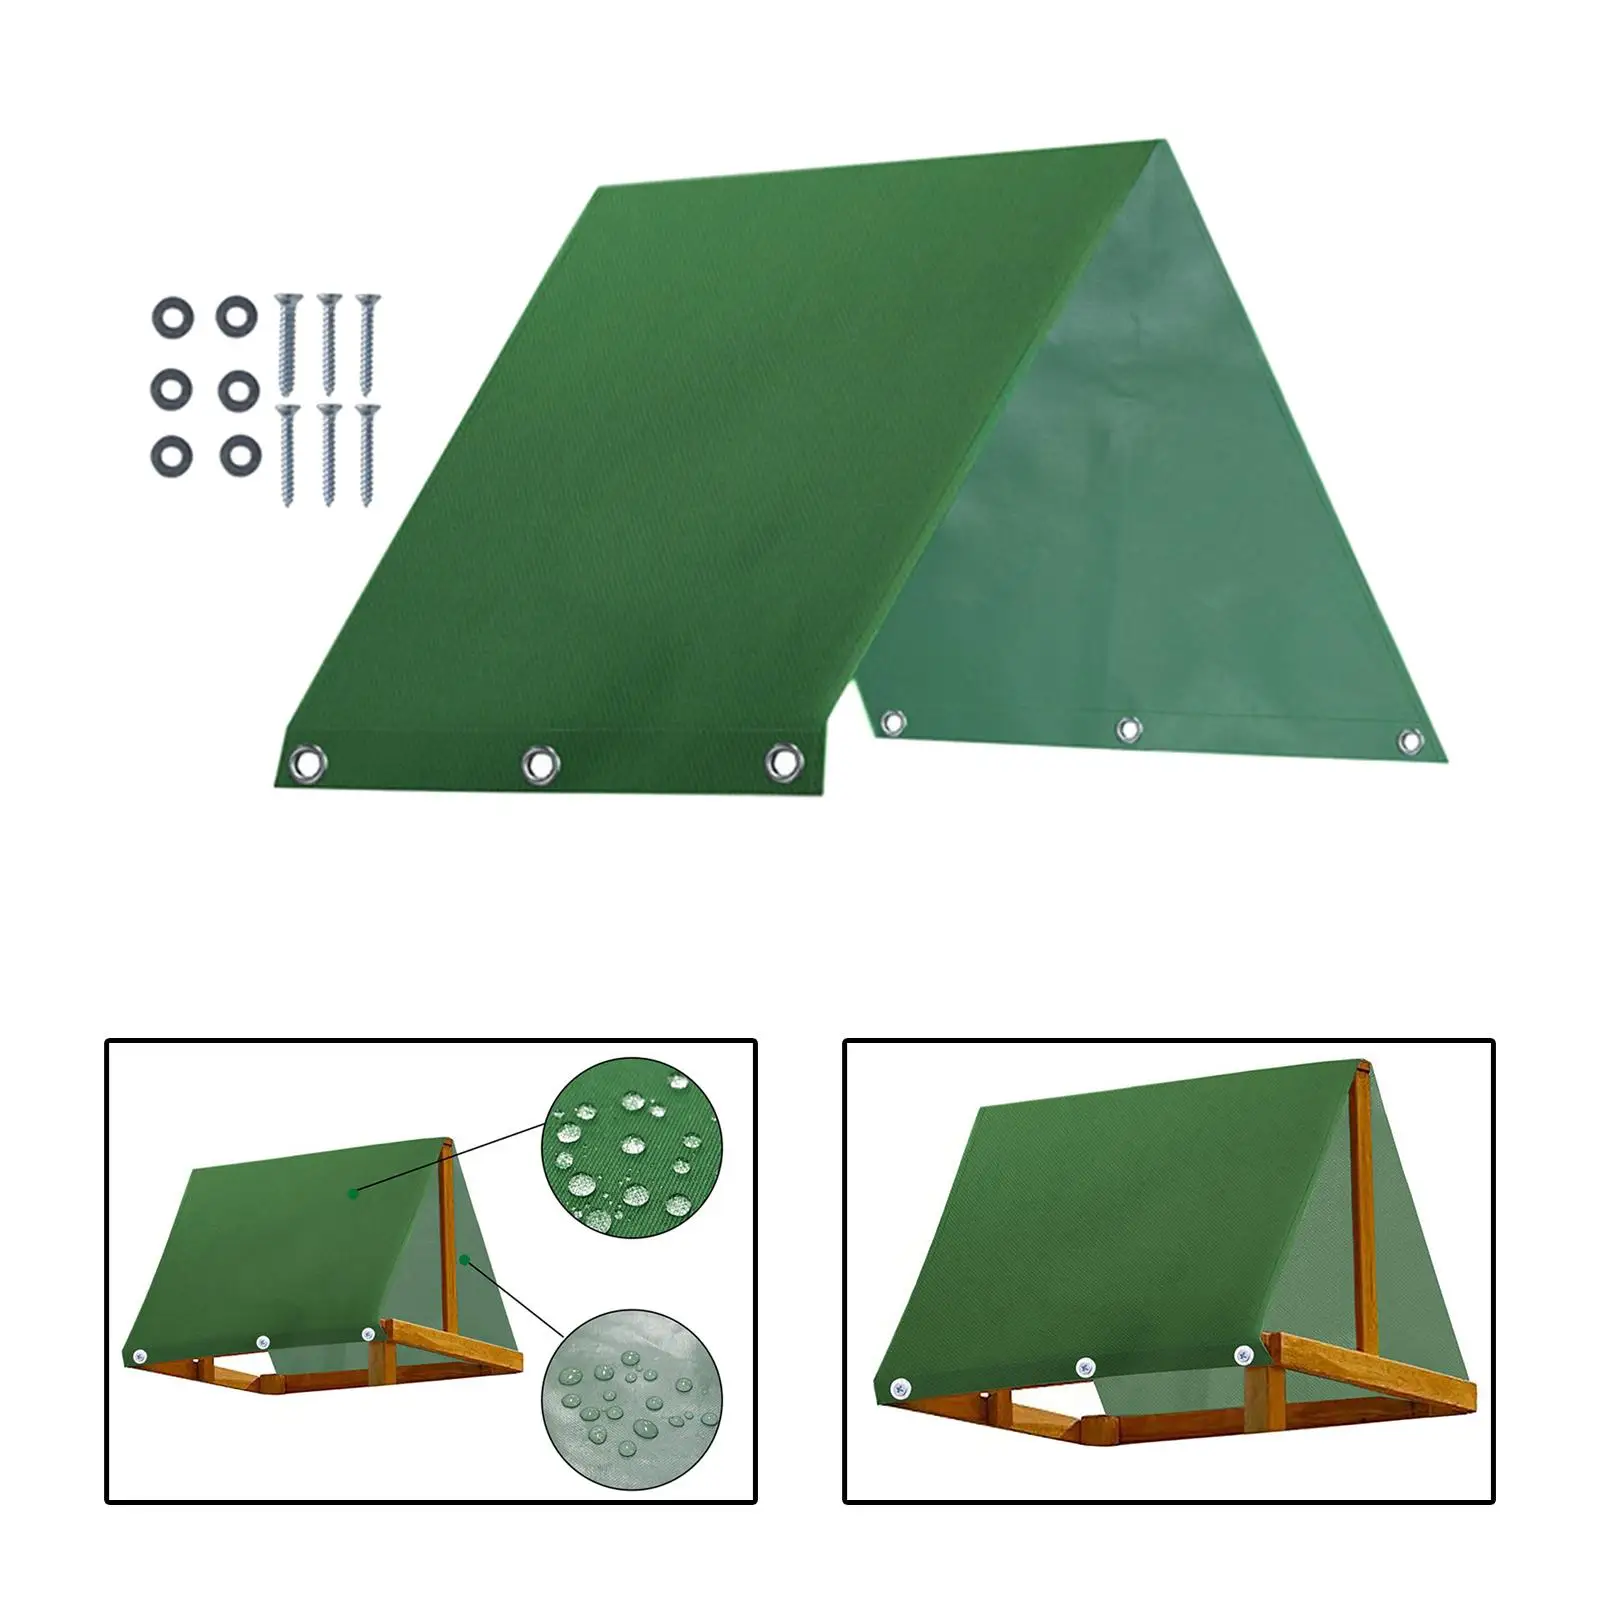 Backyard Playset Canopy Dustproof Screws, Washers Included Playground Roof